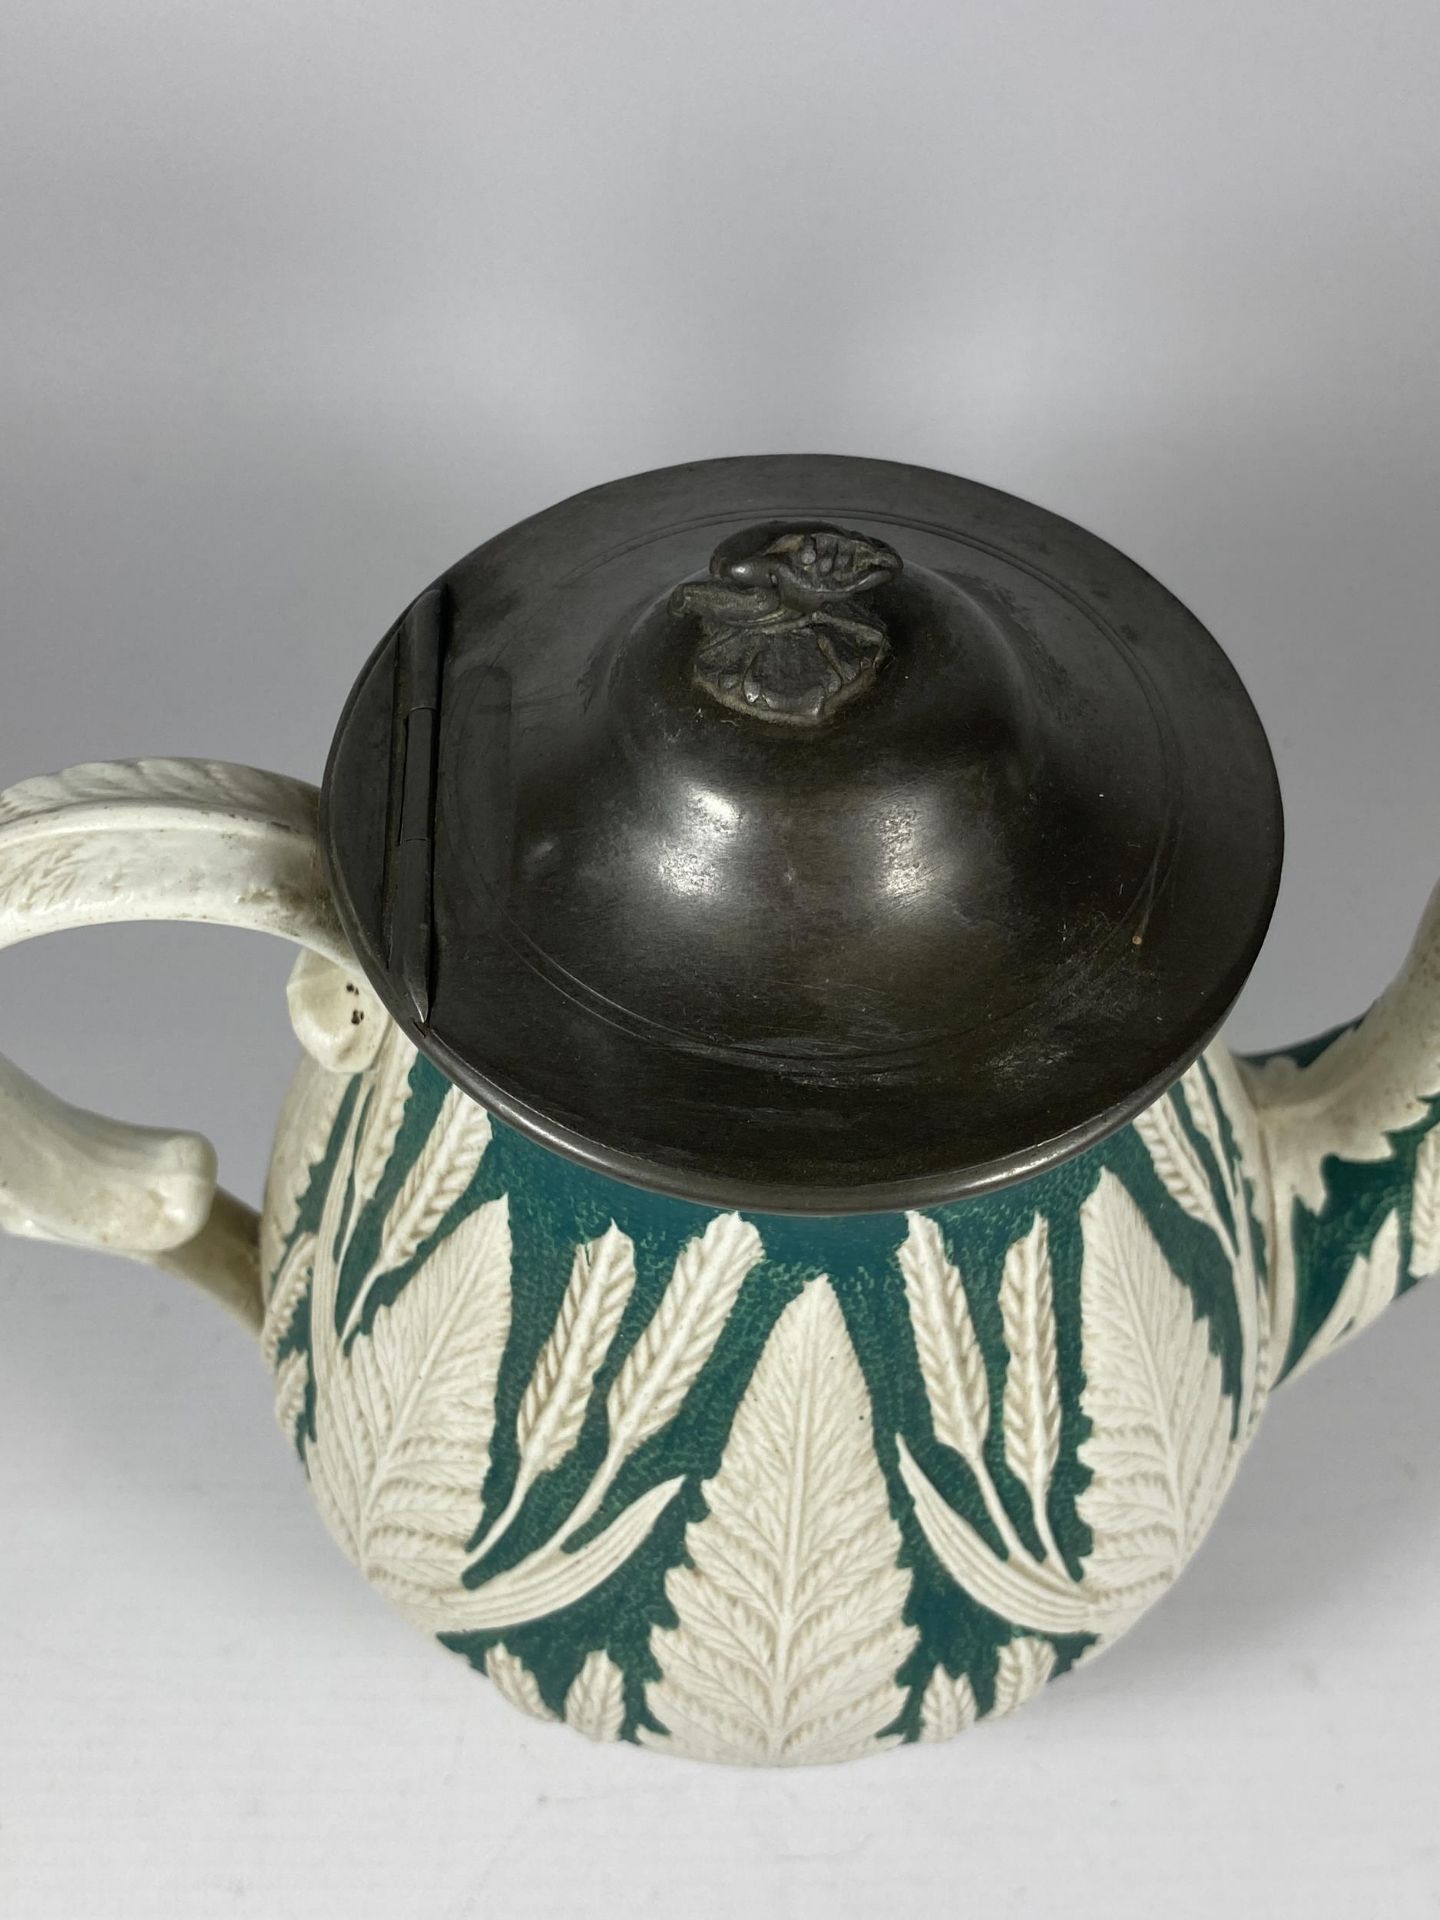 A VICTORIAN PEWTER LIDDED TEAPOT WITH WHEAT DESIGN, HEIGHT 20CM - Image 2 of 4